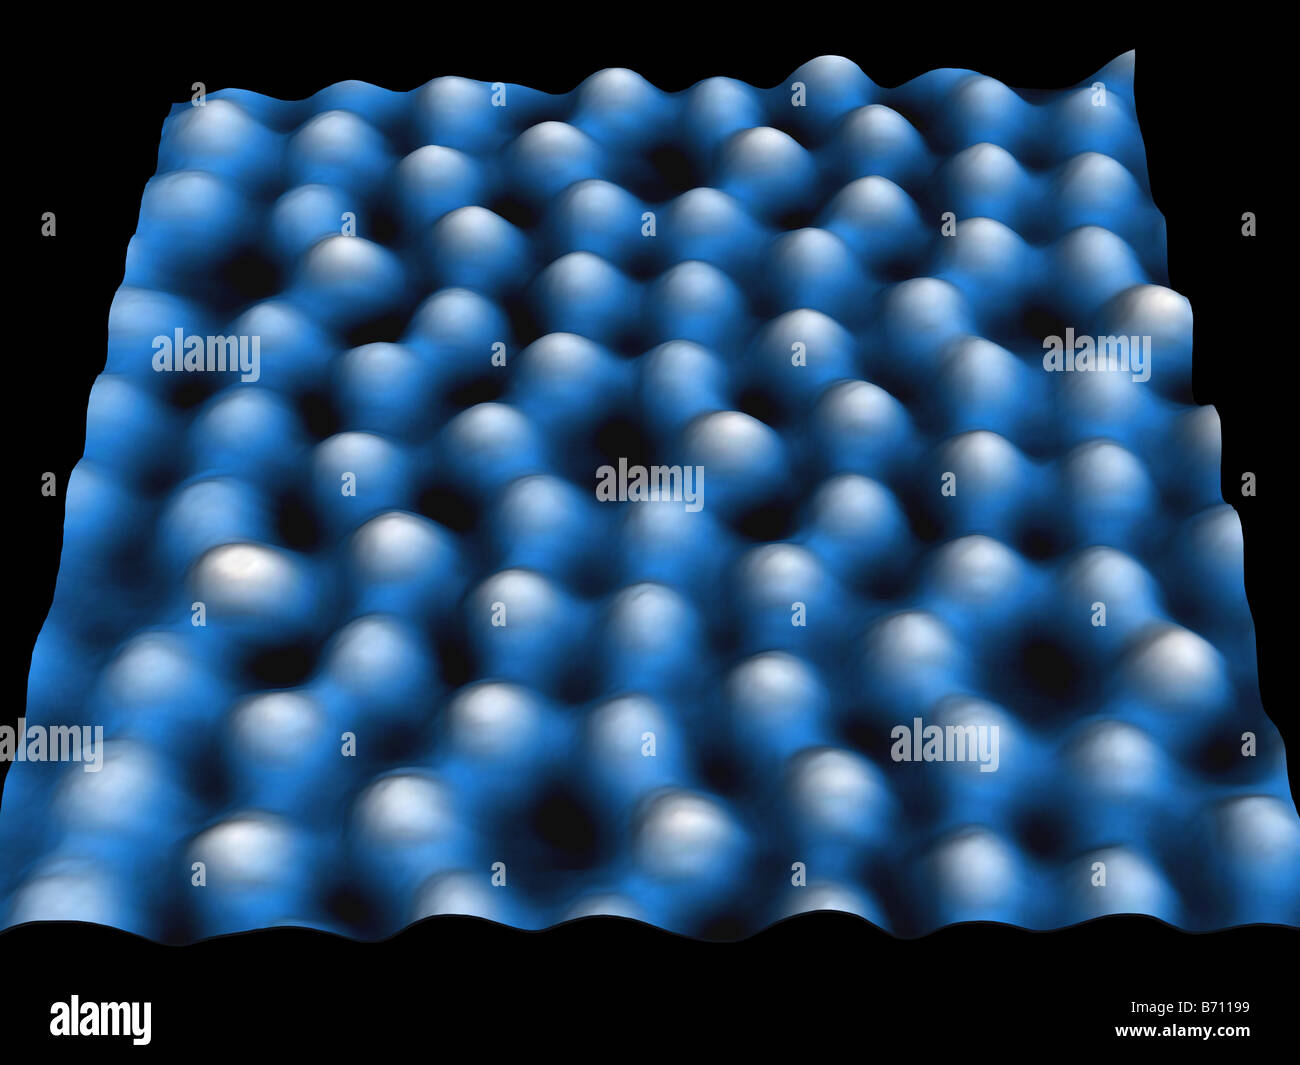 silicon-atoms-of-a-silicon-chip-imaged-with-a-scanning-tunneling-microscope-B71199.jpg